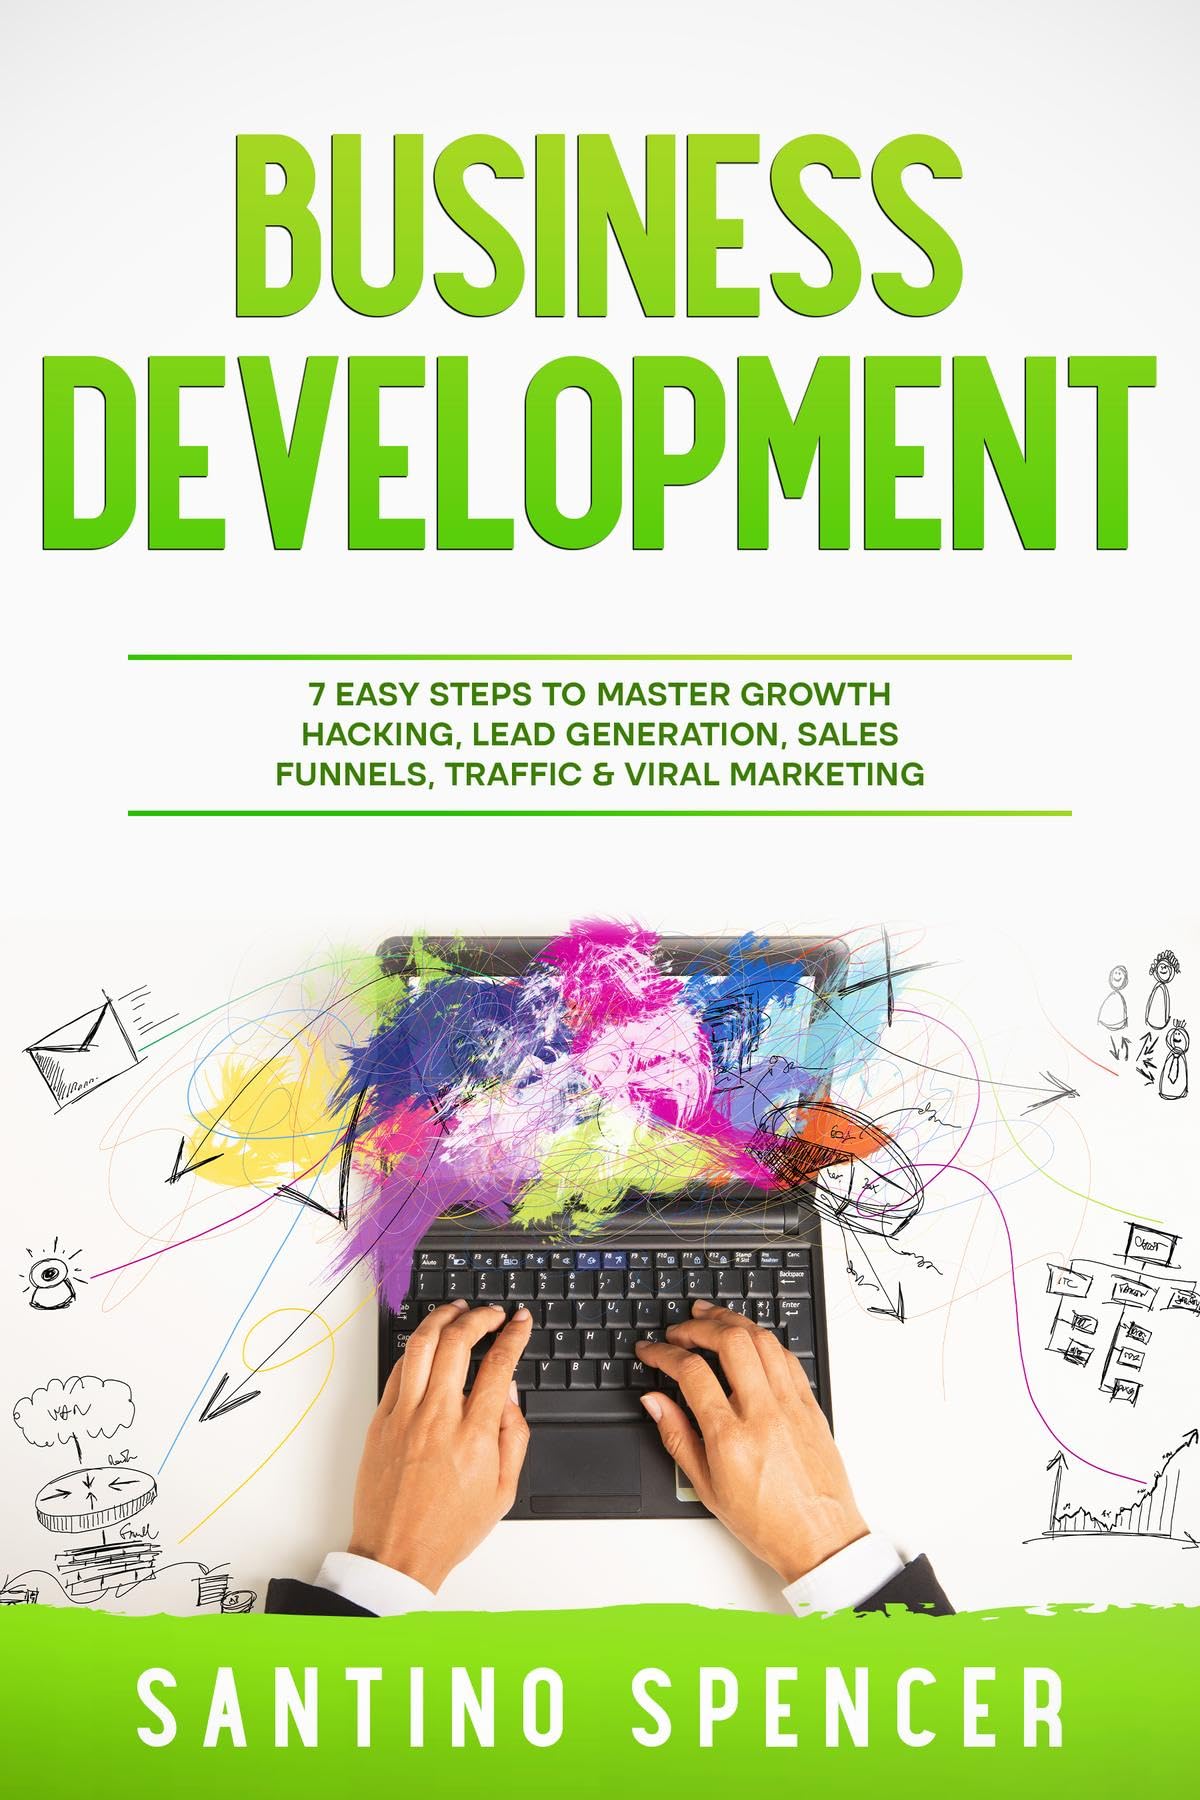 Business Development: 7 Easy Steps to Master Growth Hacking, Lead Generation, Sales Funnels, Traffic & Viral Marketing (Marketing Management)